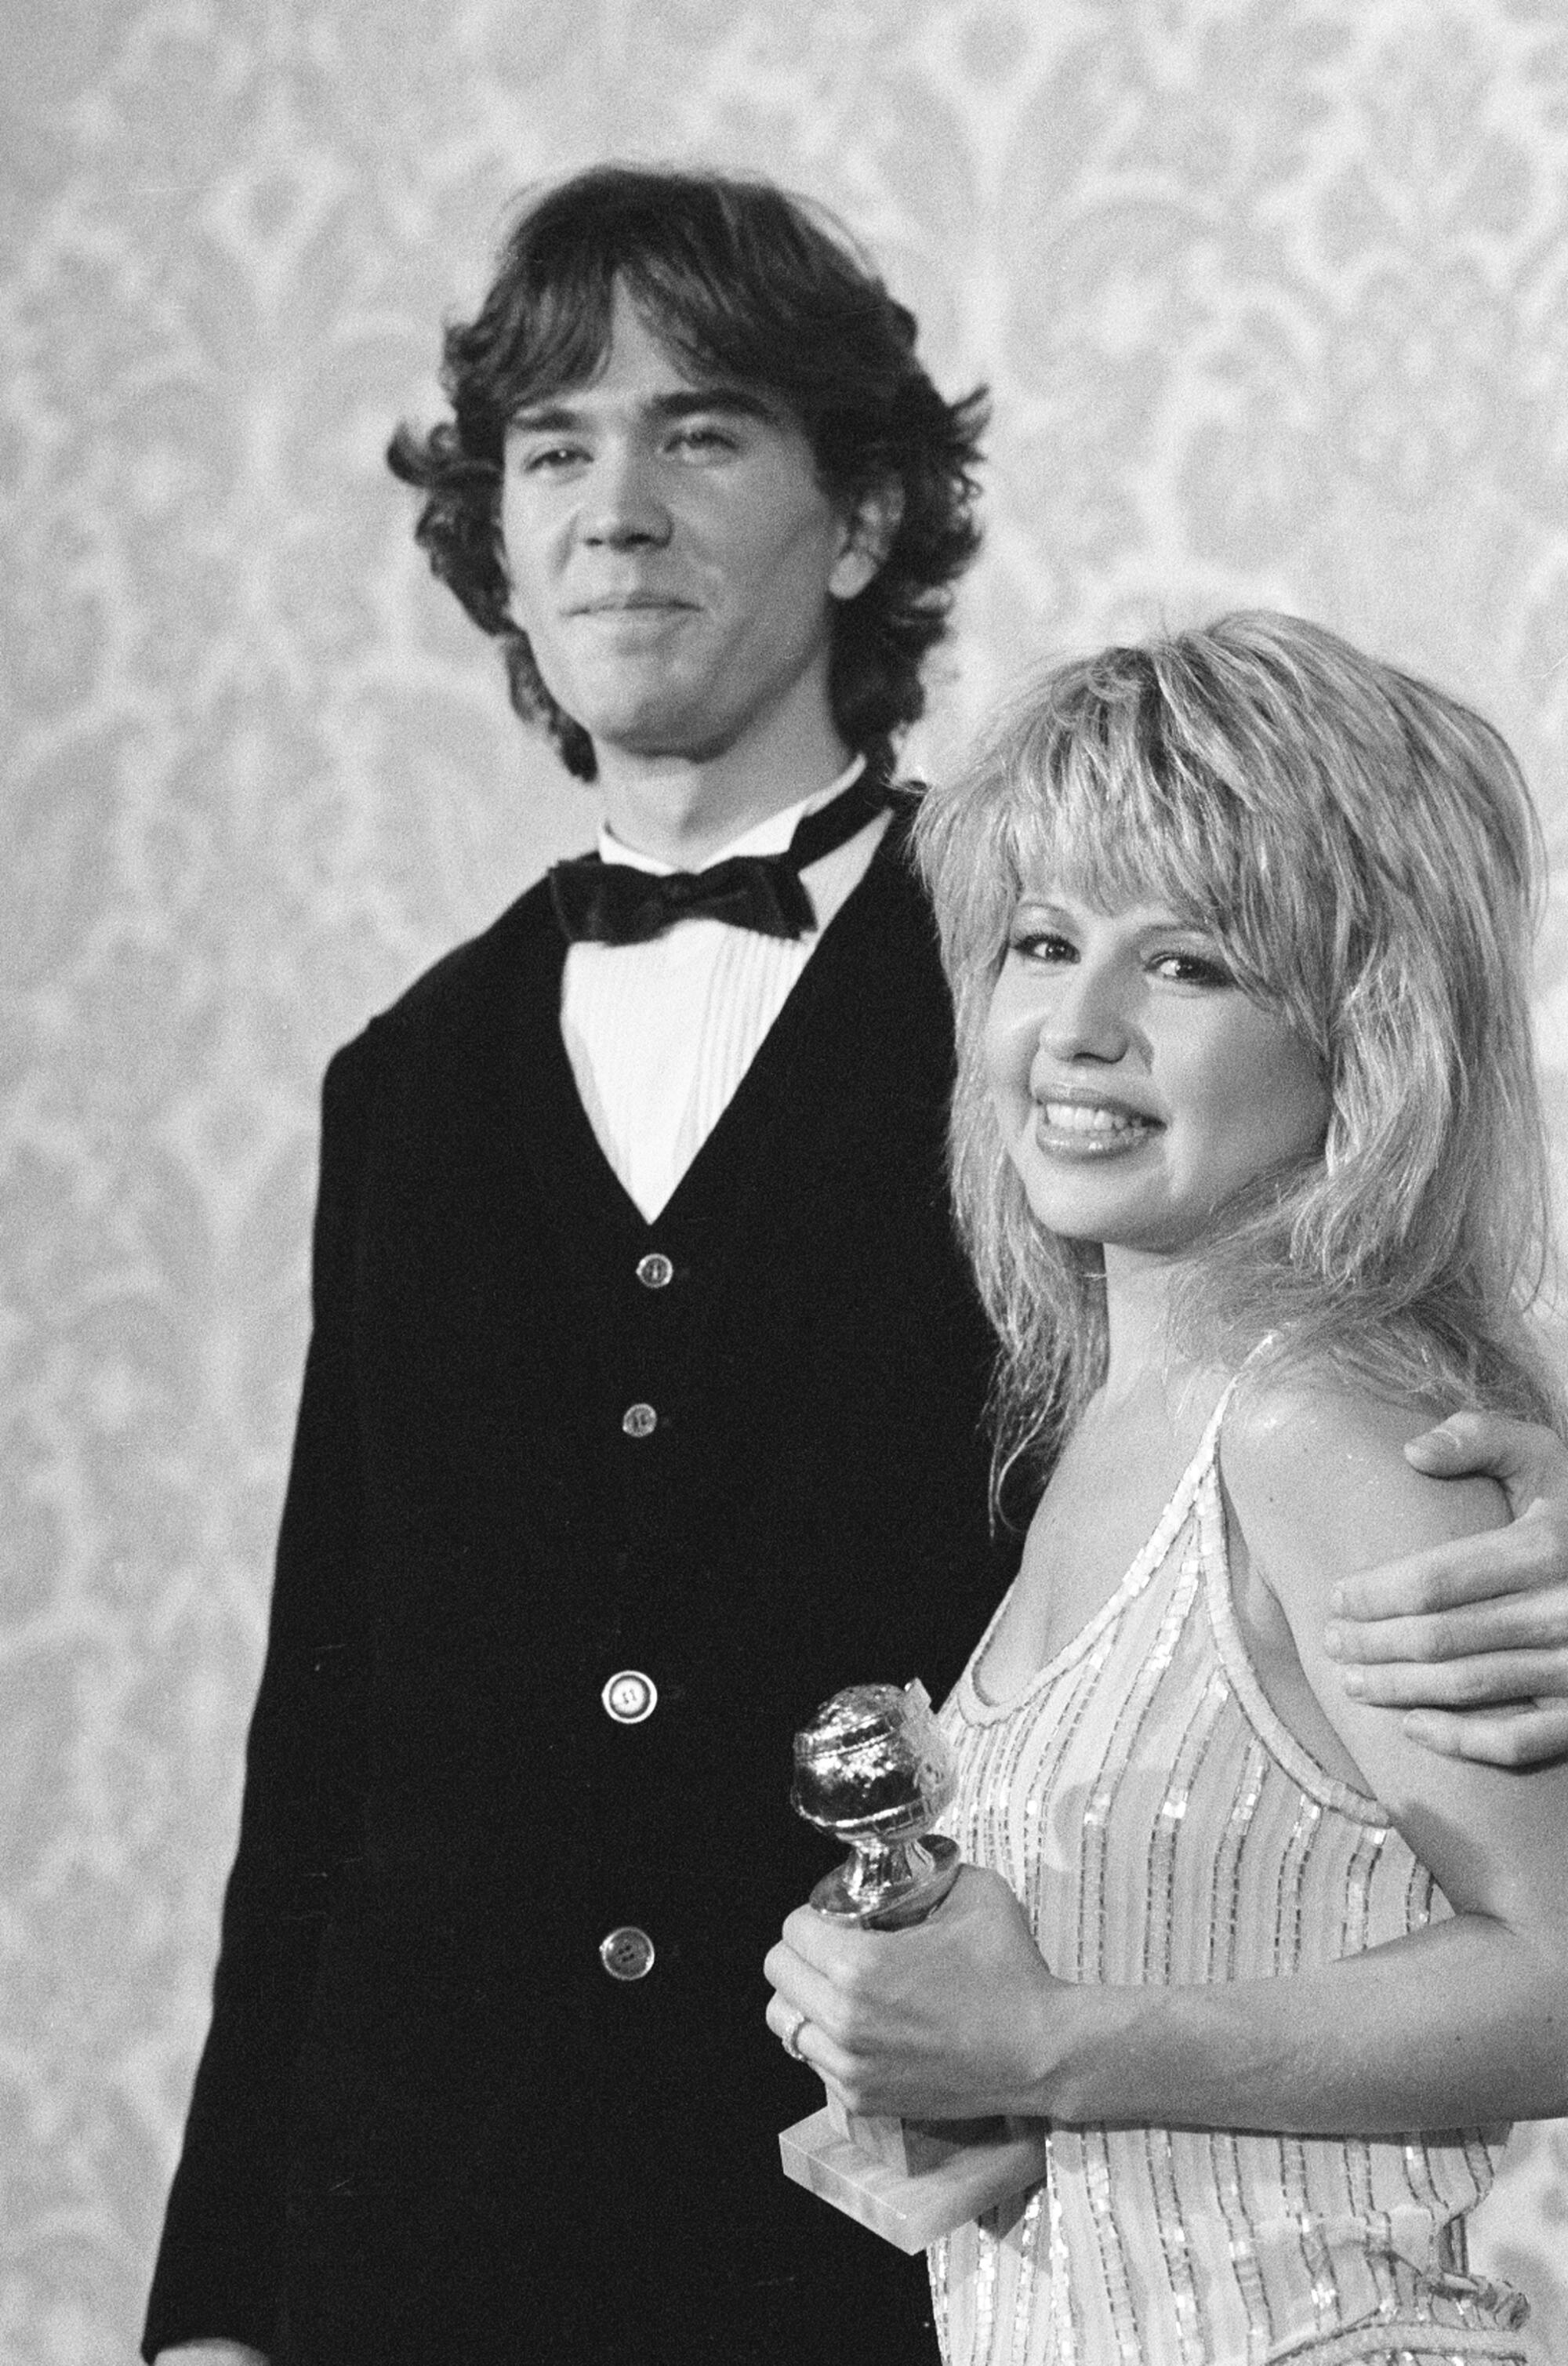 Pia Zadora holds a Golden Globes statuette in a picture with her husband